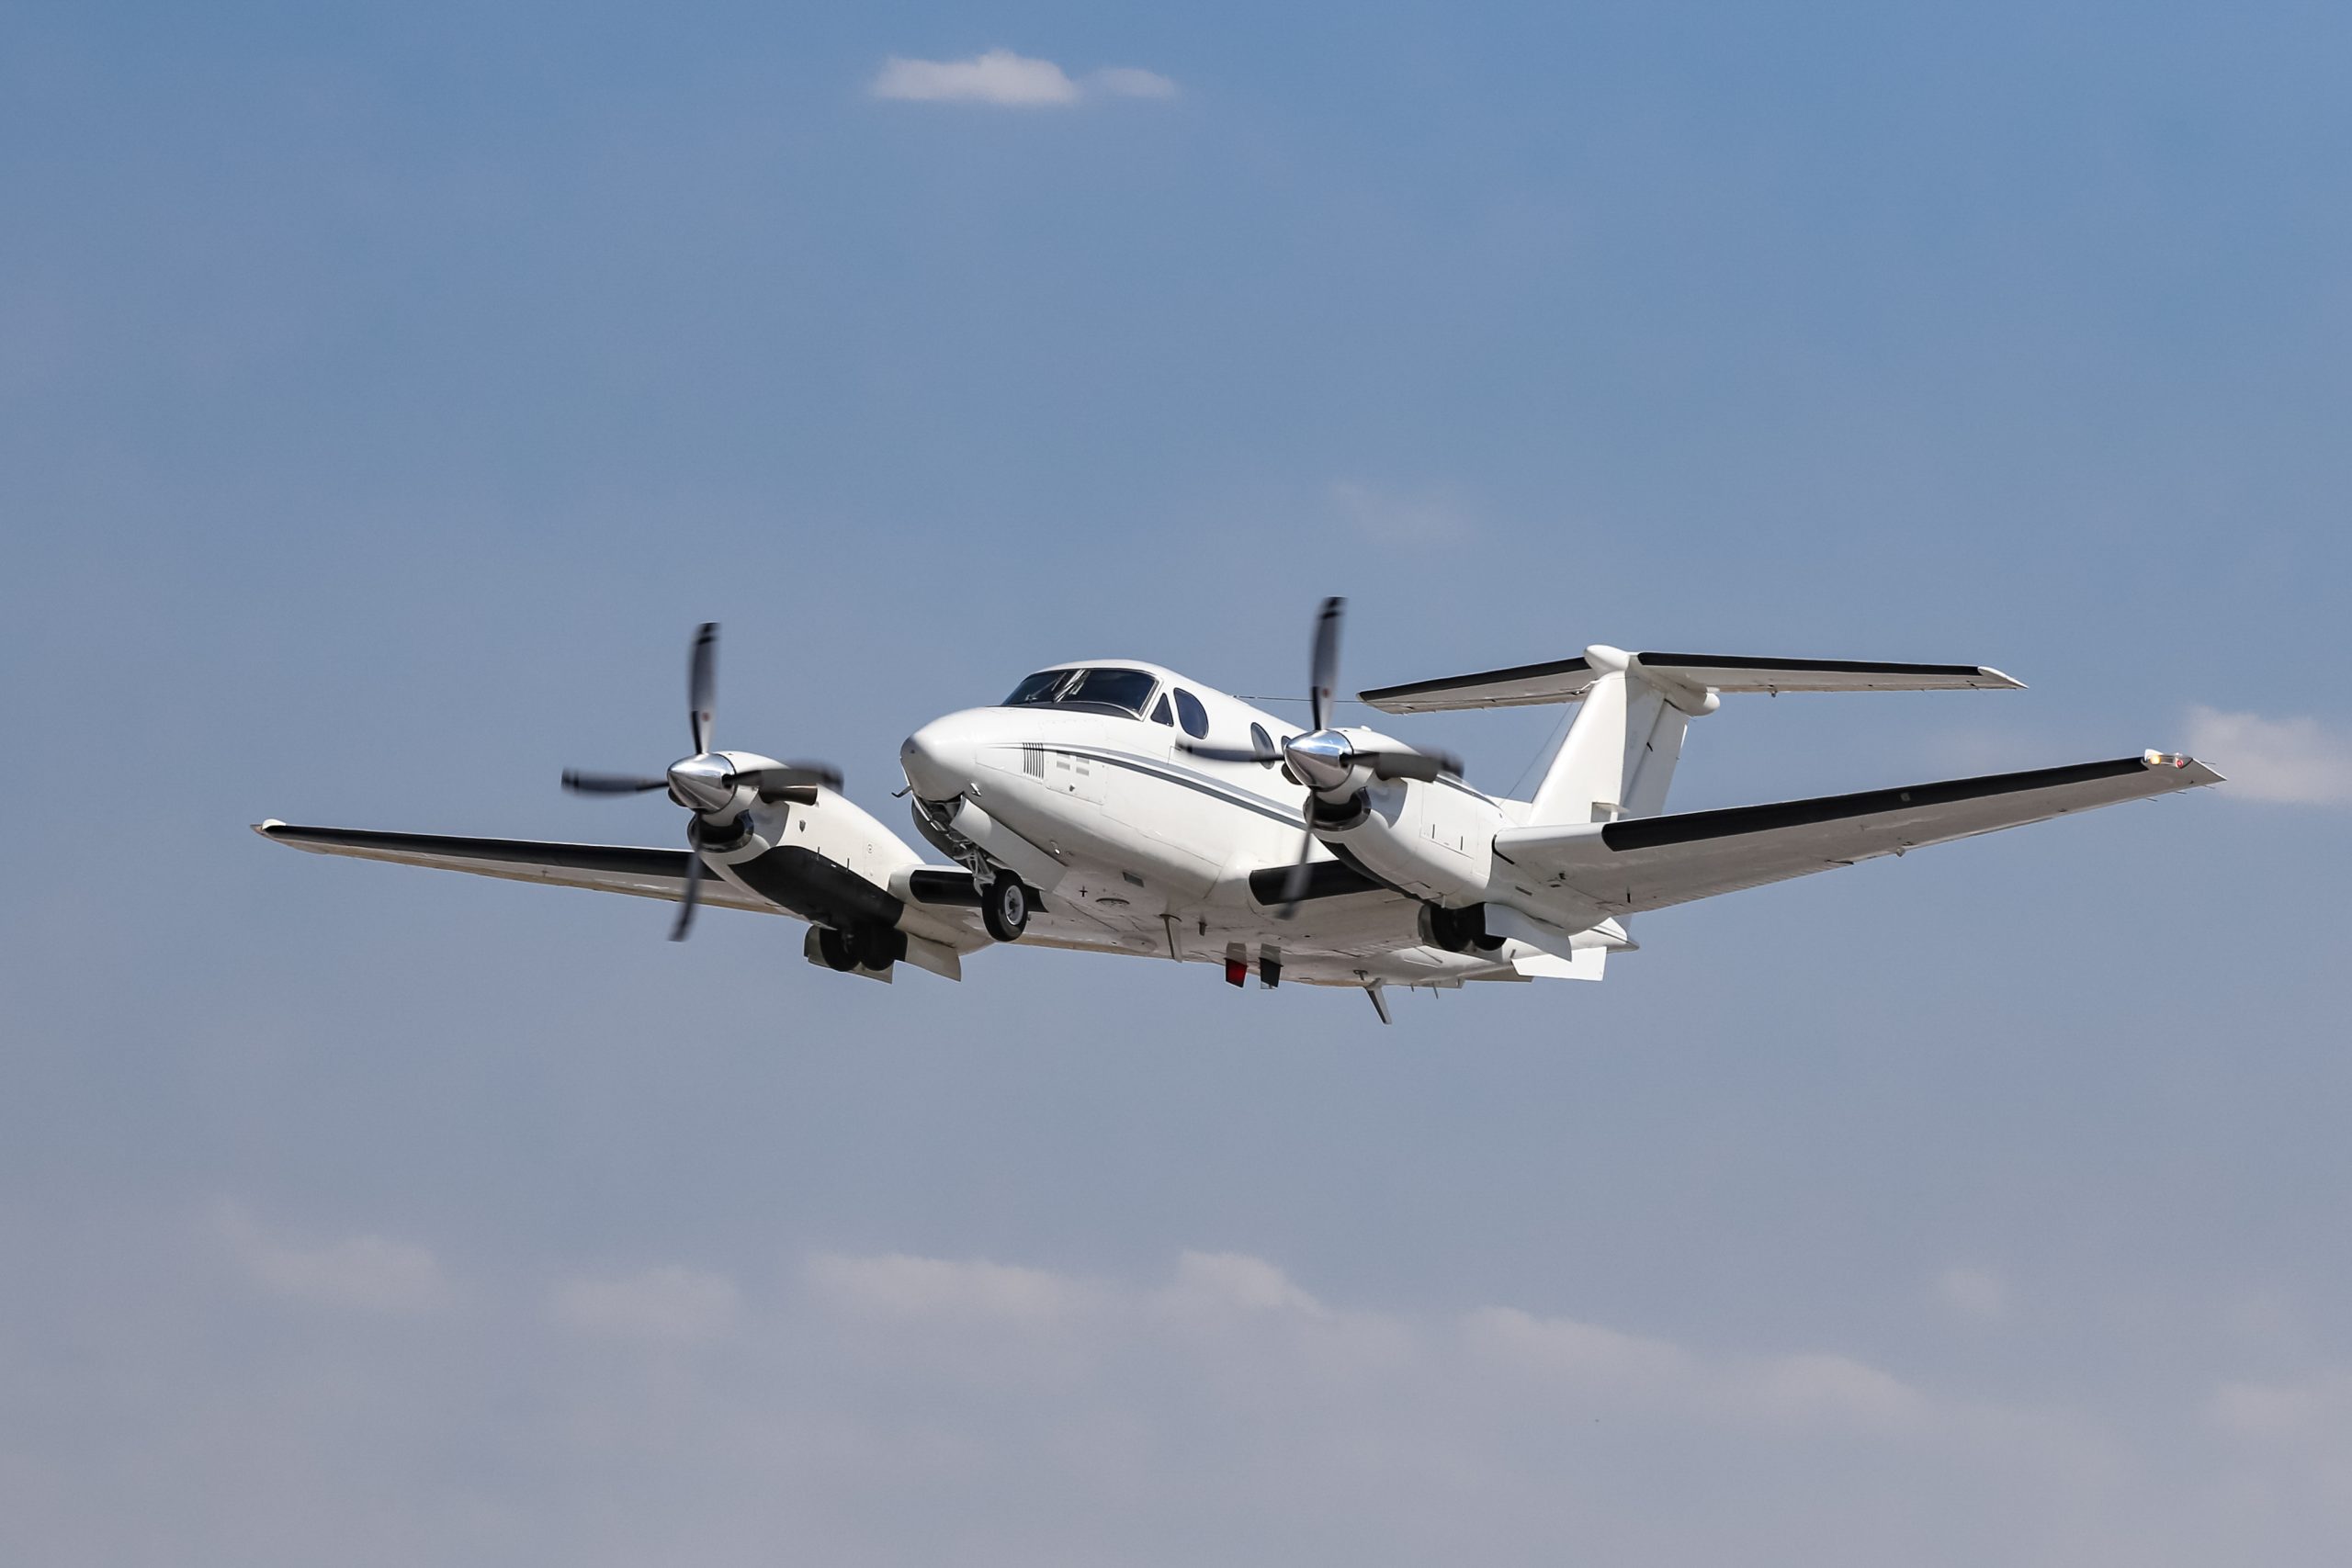 A white turboprop aircraft with two engines in flight against a clear blue sky